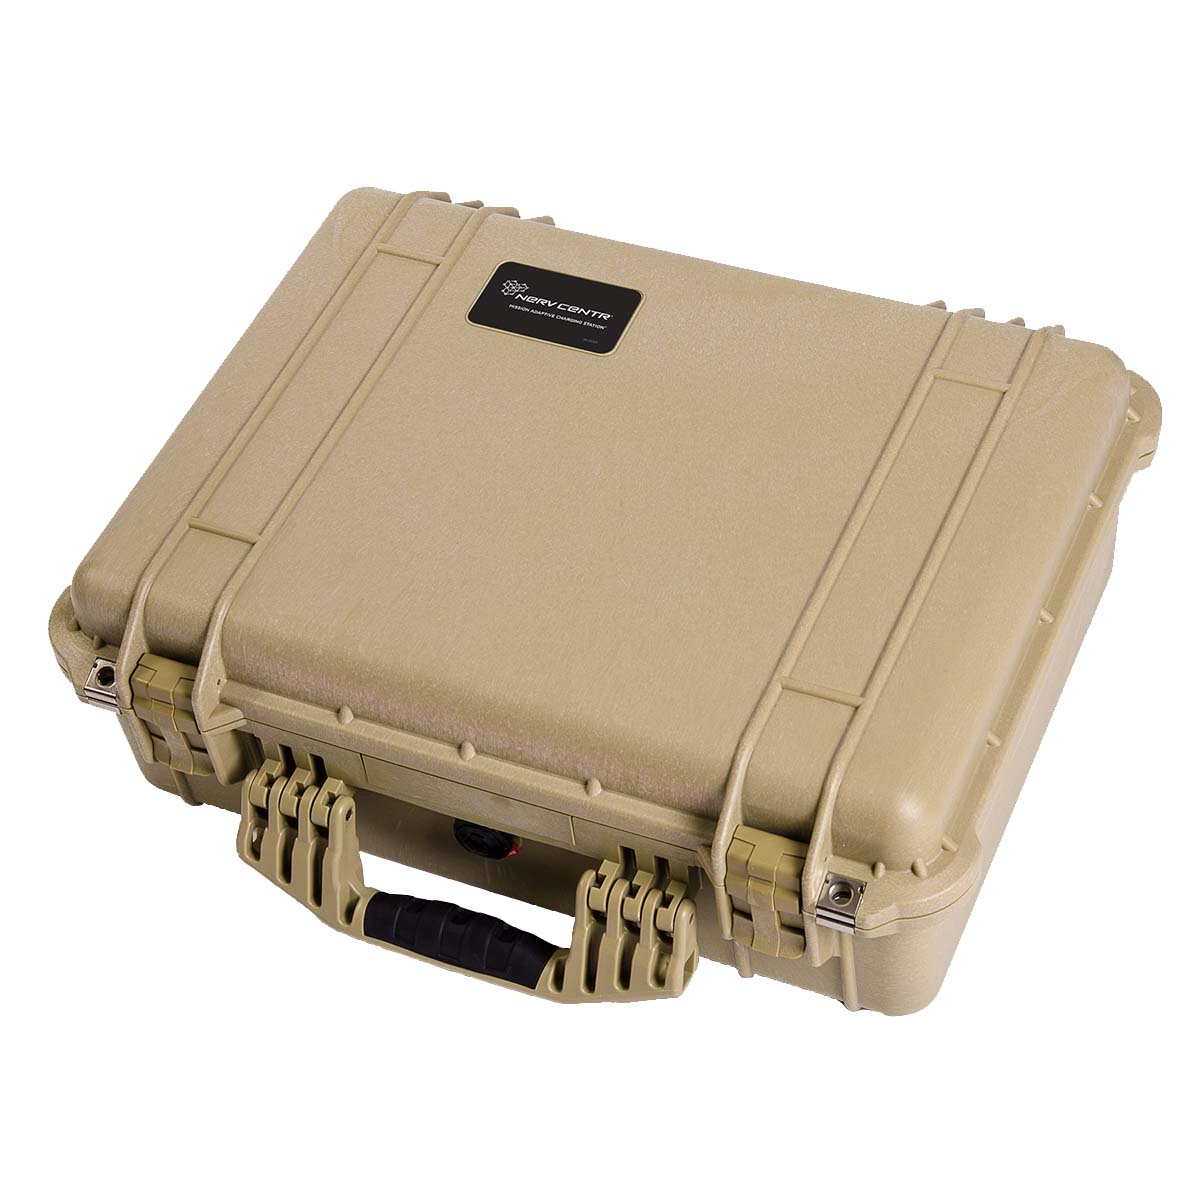 Soldiers reach back with 'comms-in-a-briefcase' for missions, Article